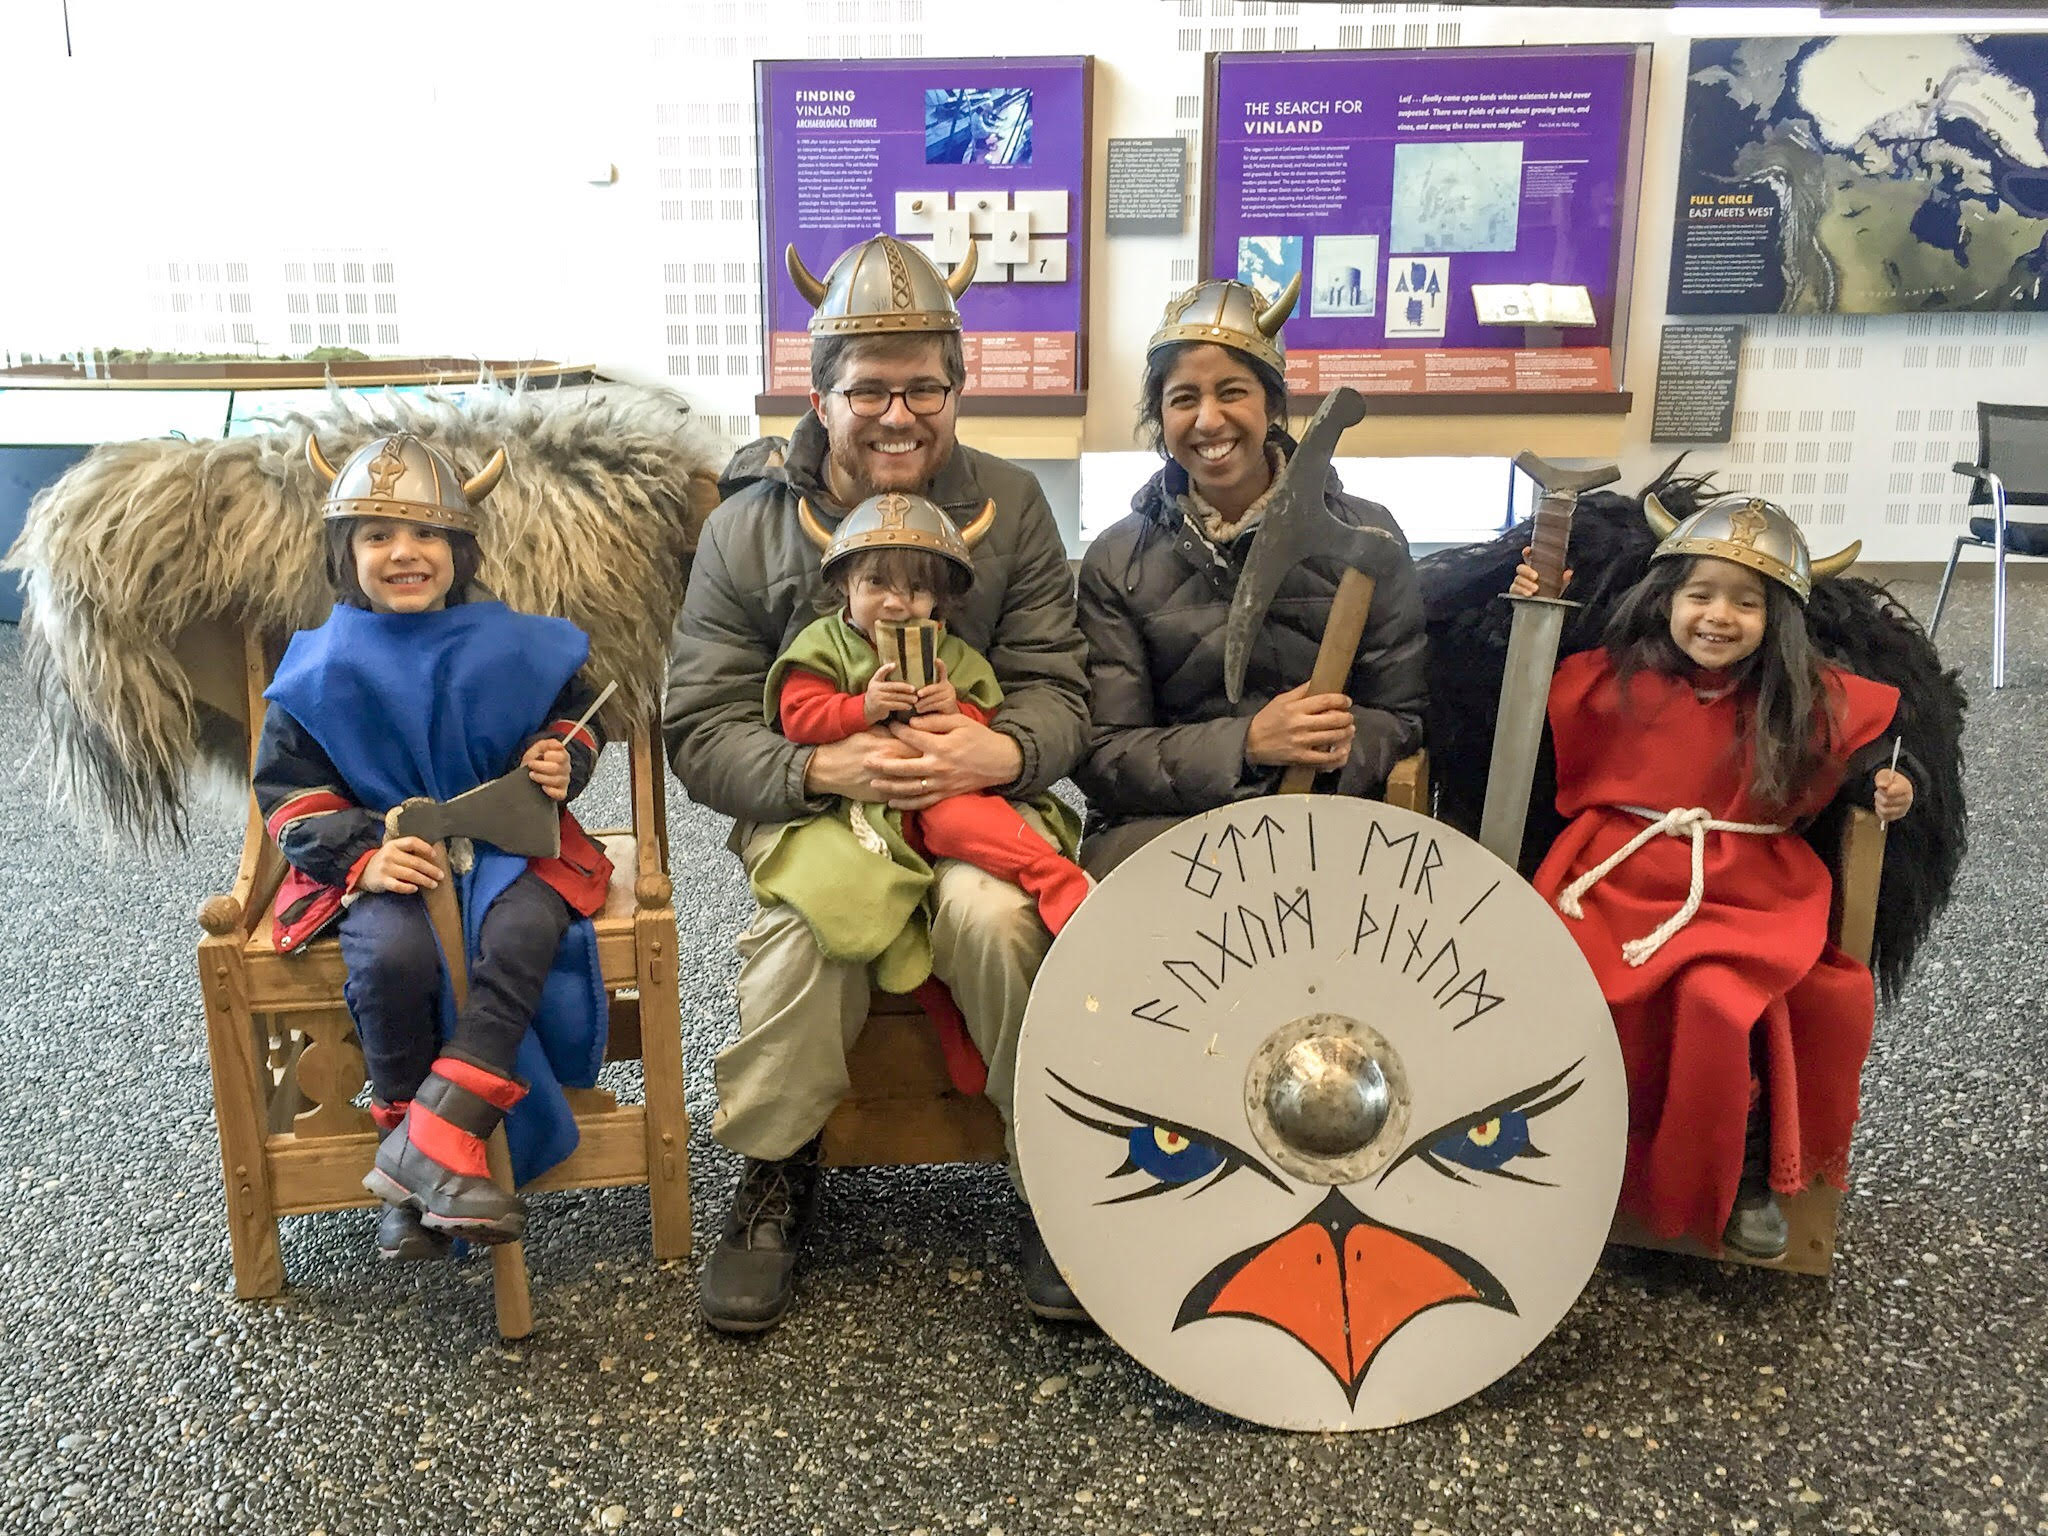 viking outfits iceland with kids